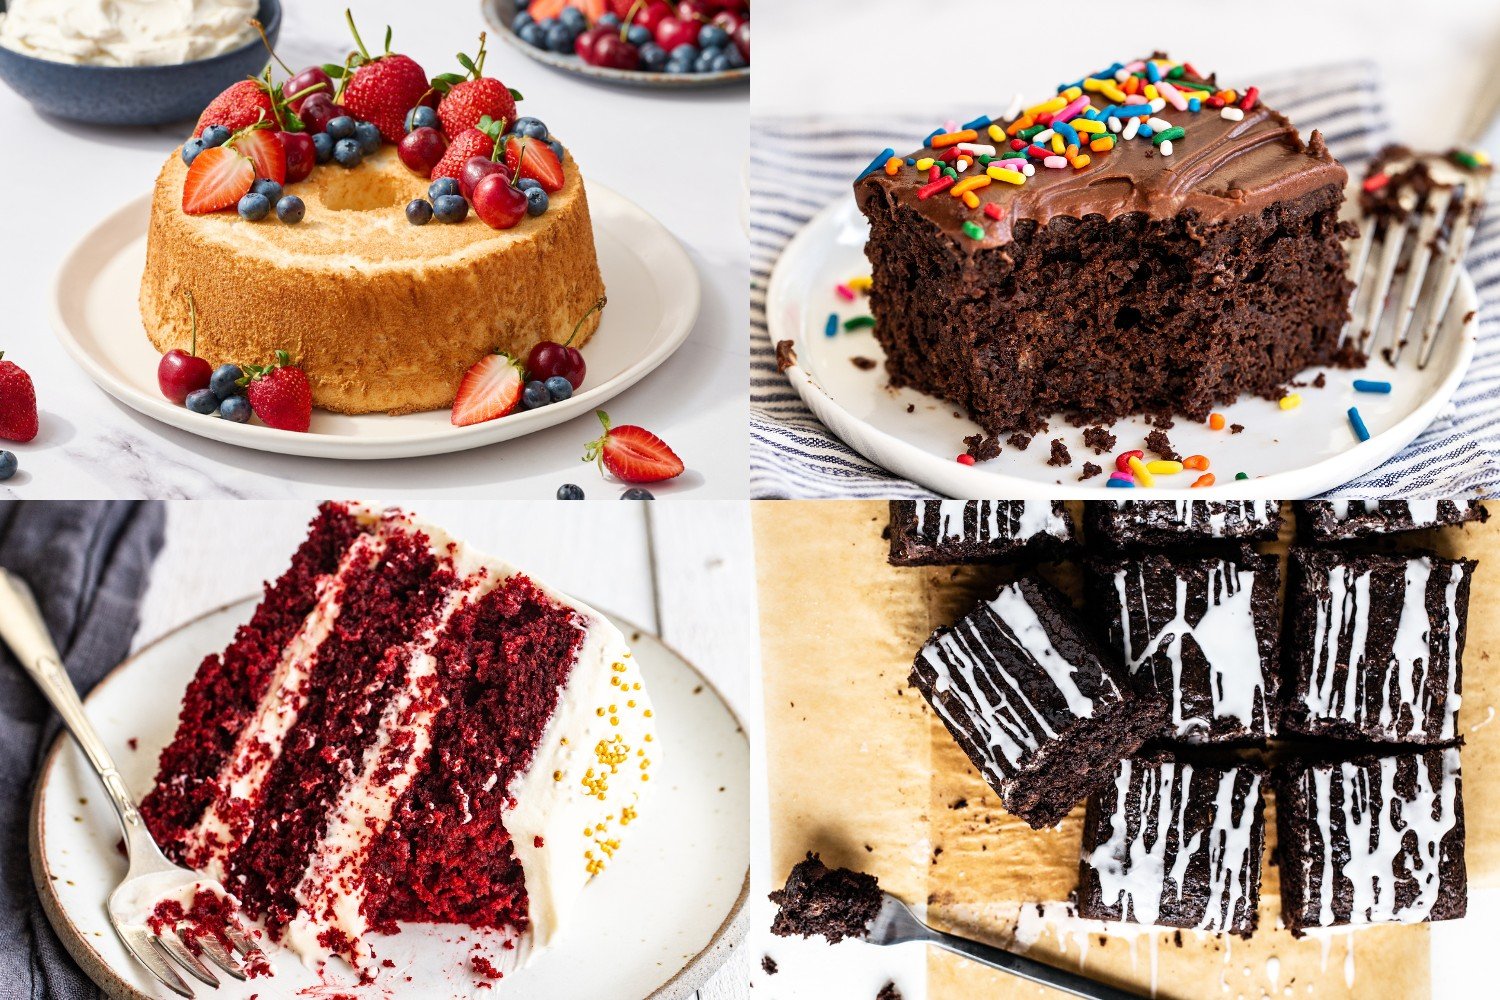 four cake images: angel food cake topped with berries, a slice of chocolate sheet cake, a slice of red velvet cake, and a whole slab of chocolate zucchini cake.